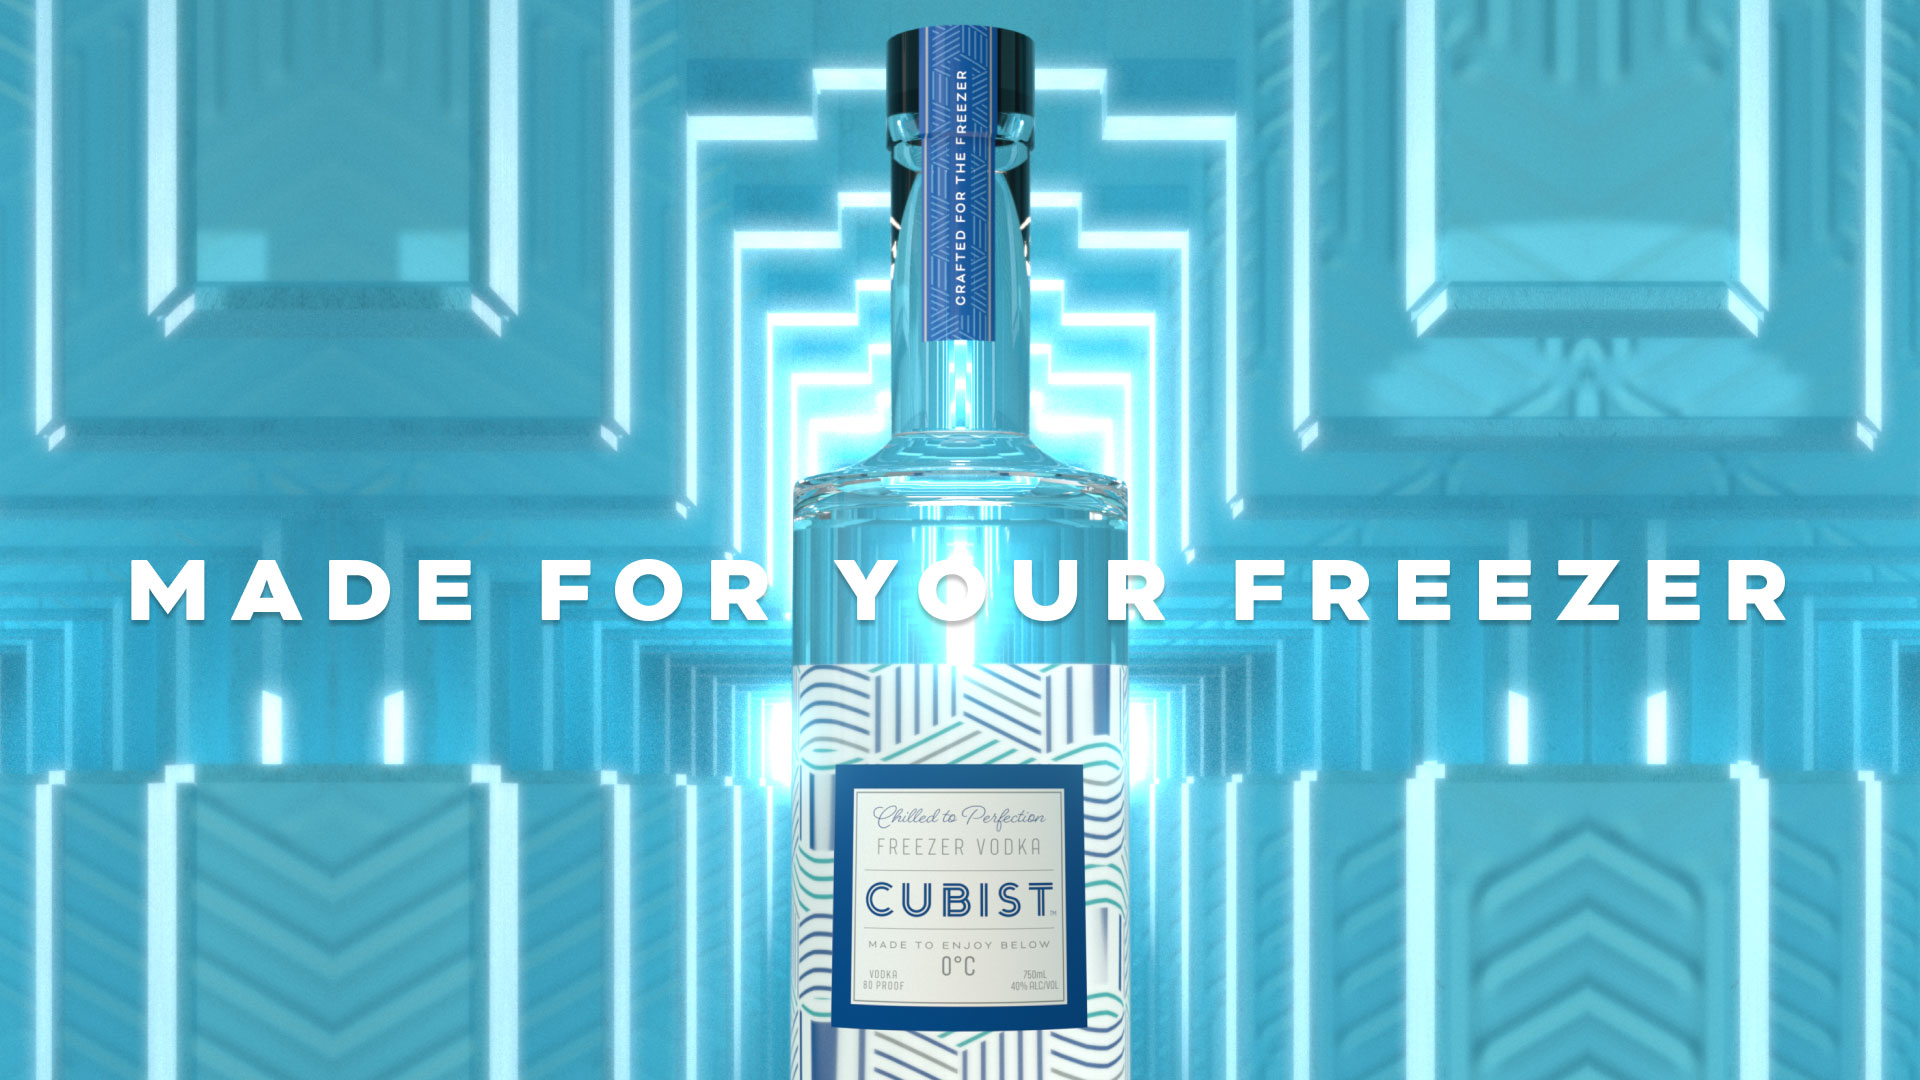 A bottle of Cubist vodka in front of an art deco background